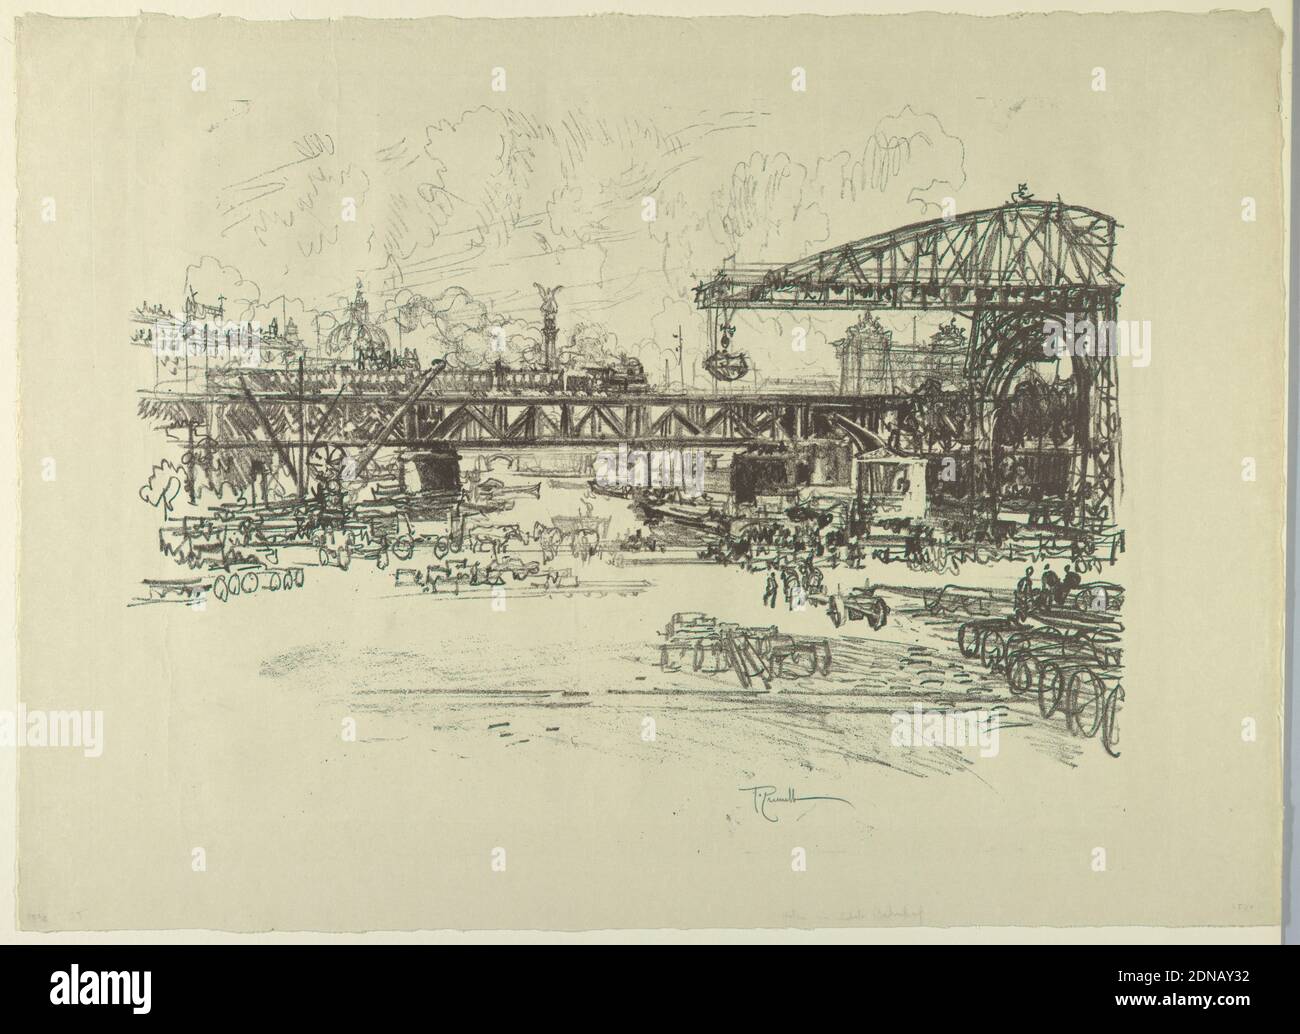 Railroad Station, Berlin, Joseph Pennell, American, active England, 1857–1926, Lithograph on cream wove paper, Large crane operating on right side. Horse-drawn vehicles in foreground; in background, view of the city skyline. Part of Lehrter Station, Berlin., USA, 1921, architecture, Print Stock Photo